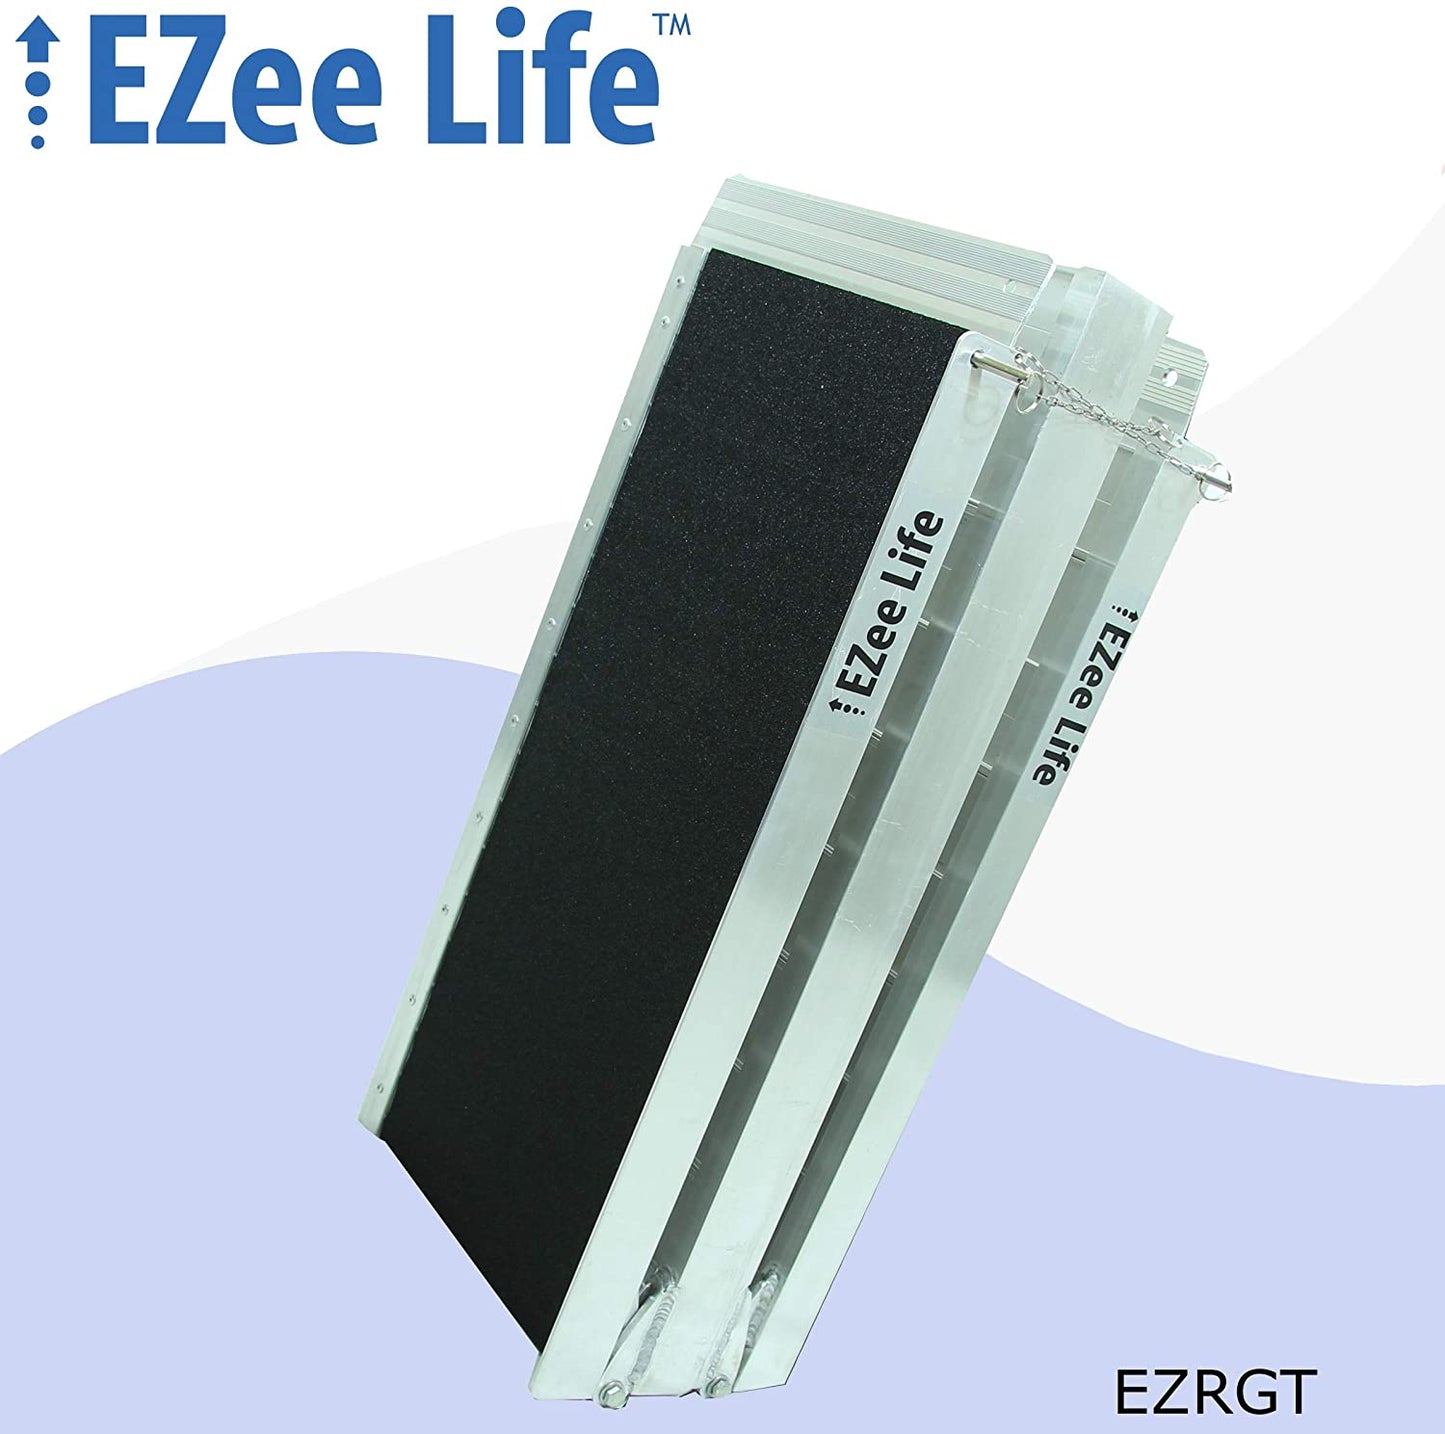 7 Foot Ramp - EZee Life Portable 7FT Multi-Fold Aluminium Wheelchair and Mobility Scooter Ramp Non-Skid with Grip